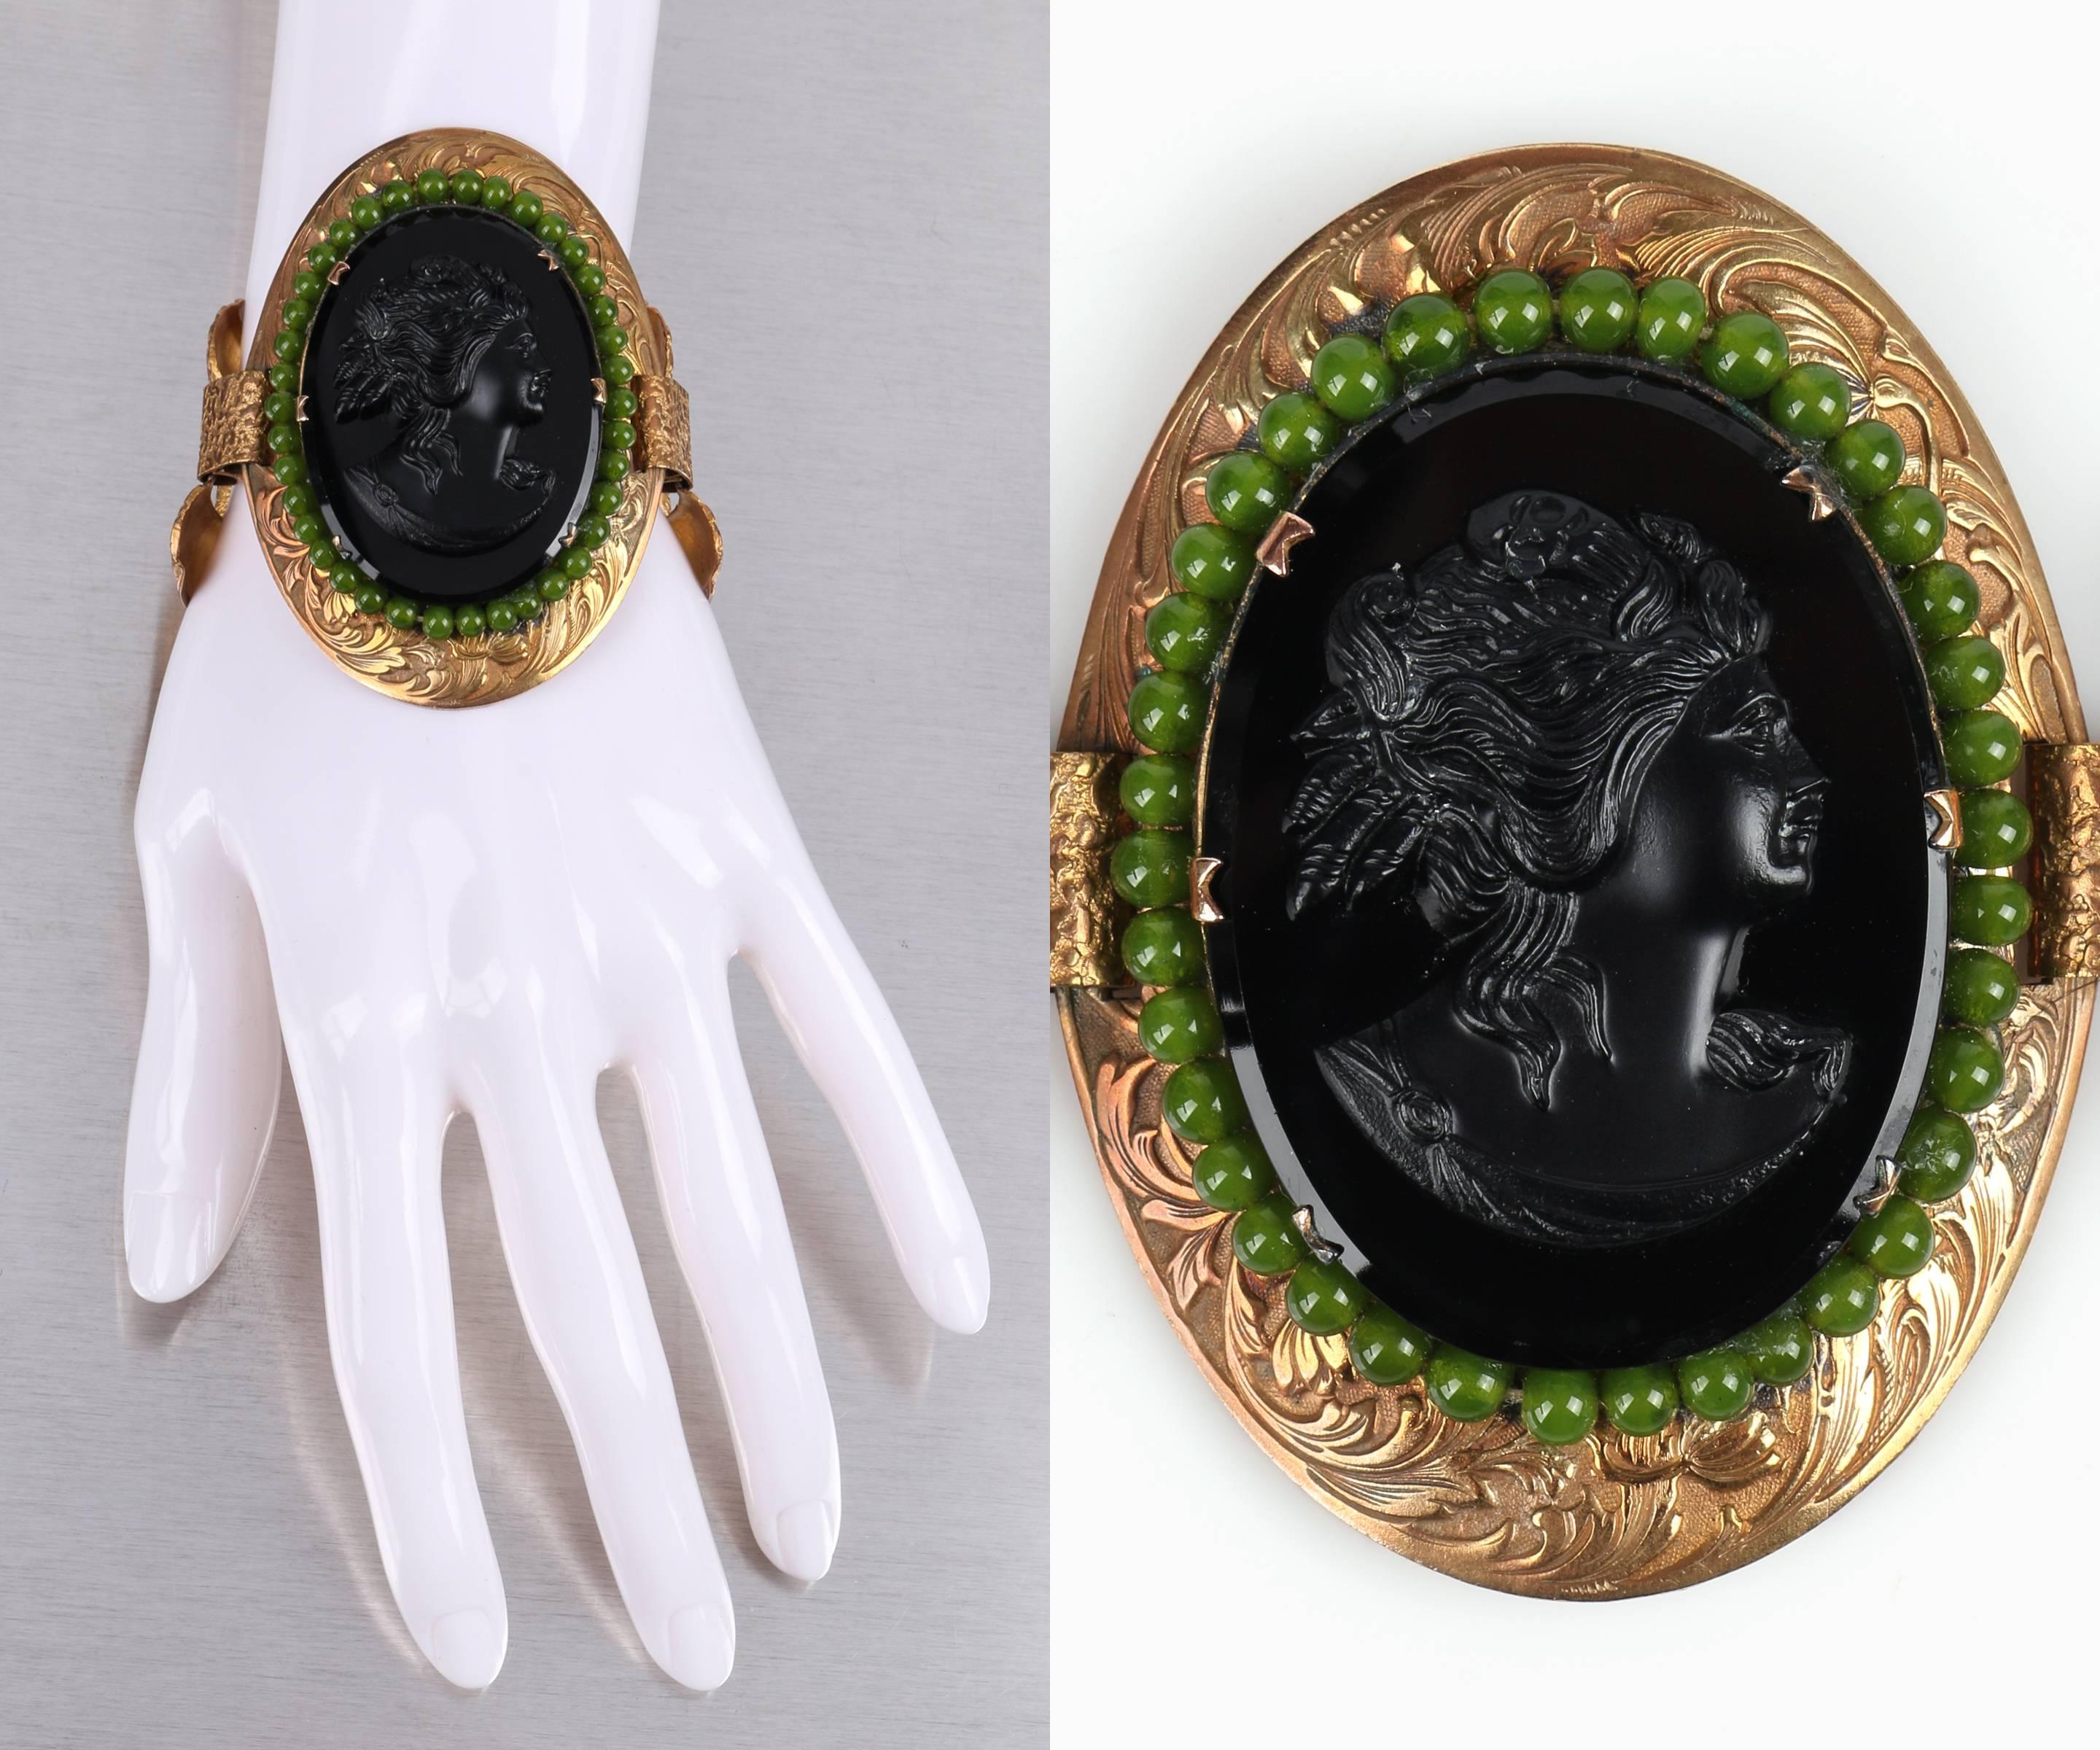 Vintage c.1930's Victorian Revival black glass cameo bronze link statement bracelet. Oval black glass Grecian cameo, surrounded by moss green glass beads. Six prong large oval bronze toned floral engraved setting. Large rectangular open link floral